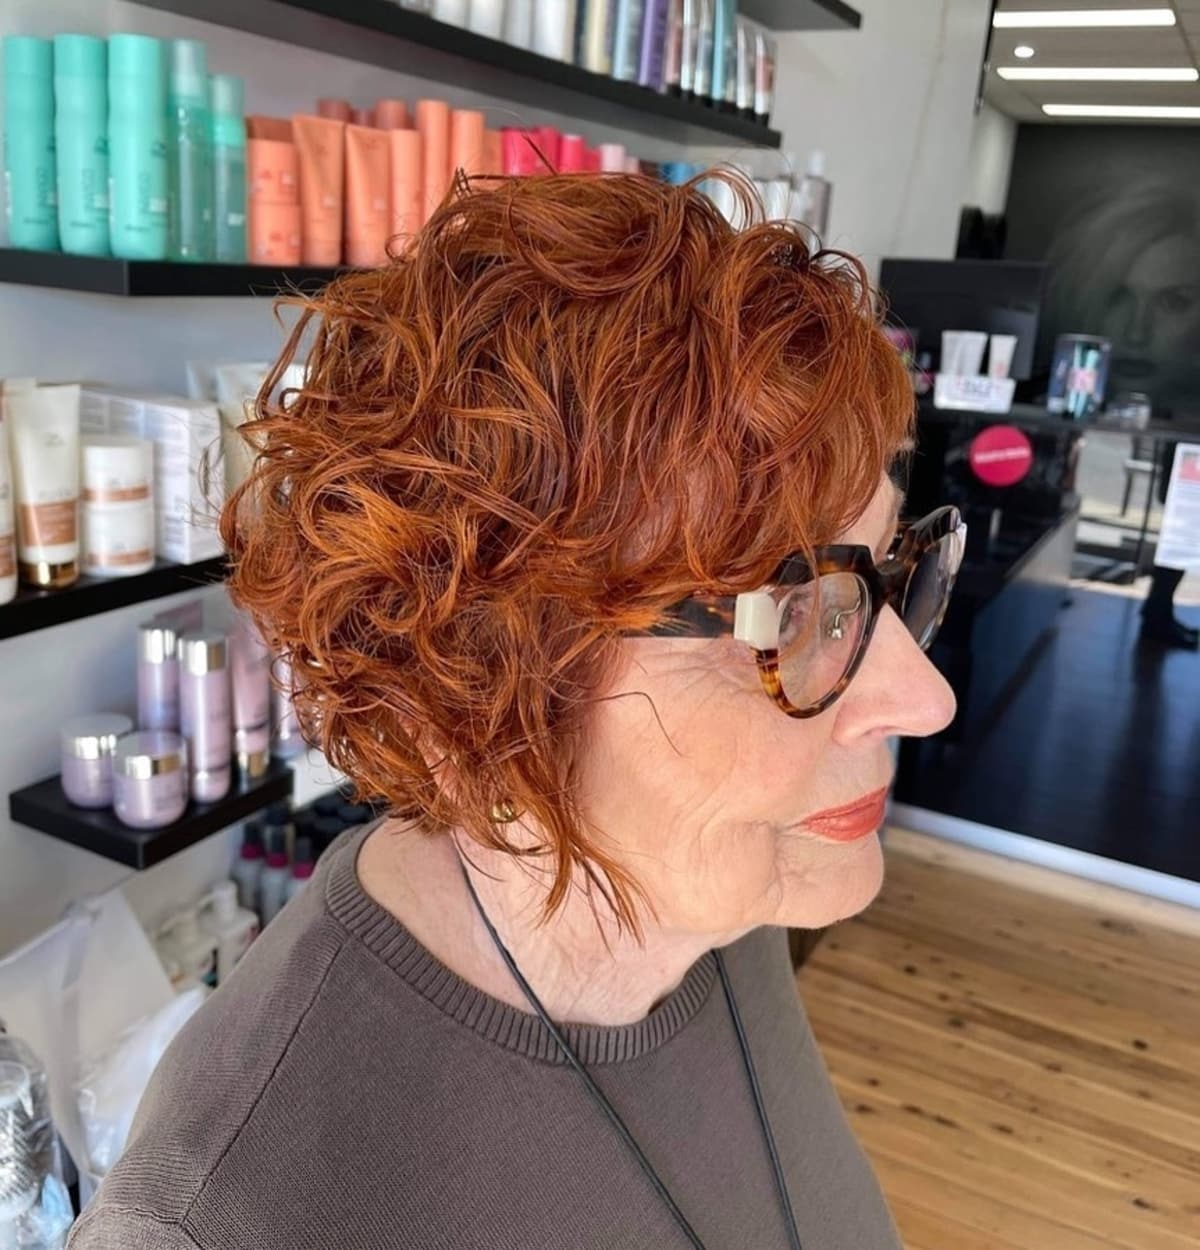 Short asymmetrical Bob for women over 60 with curly hair